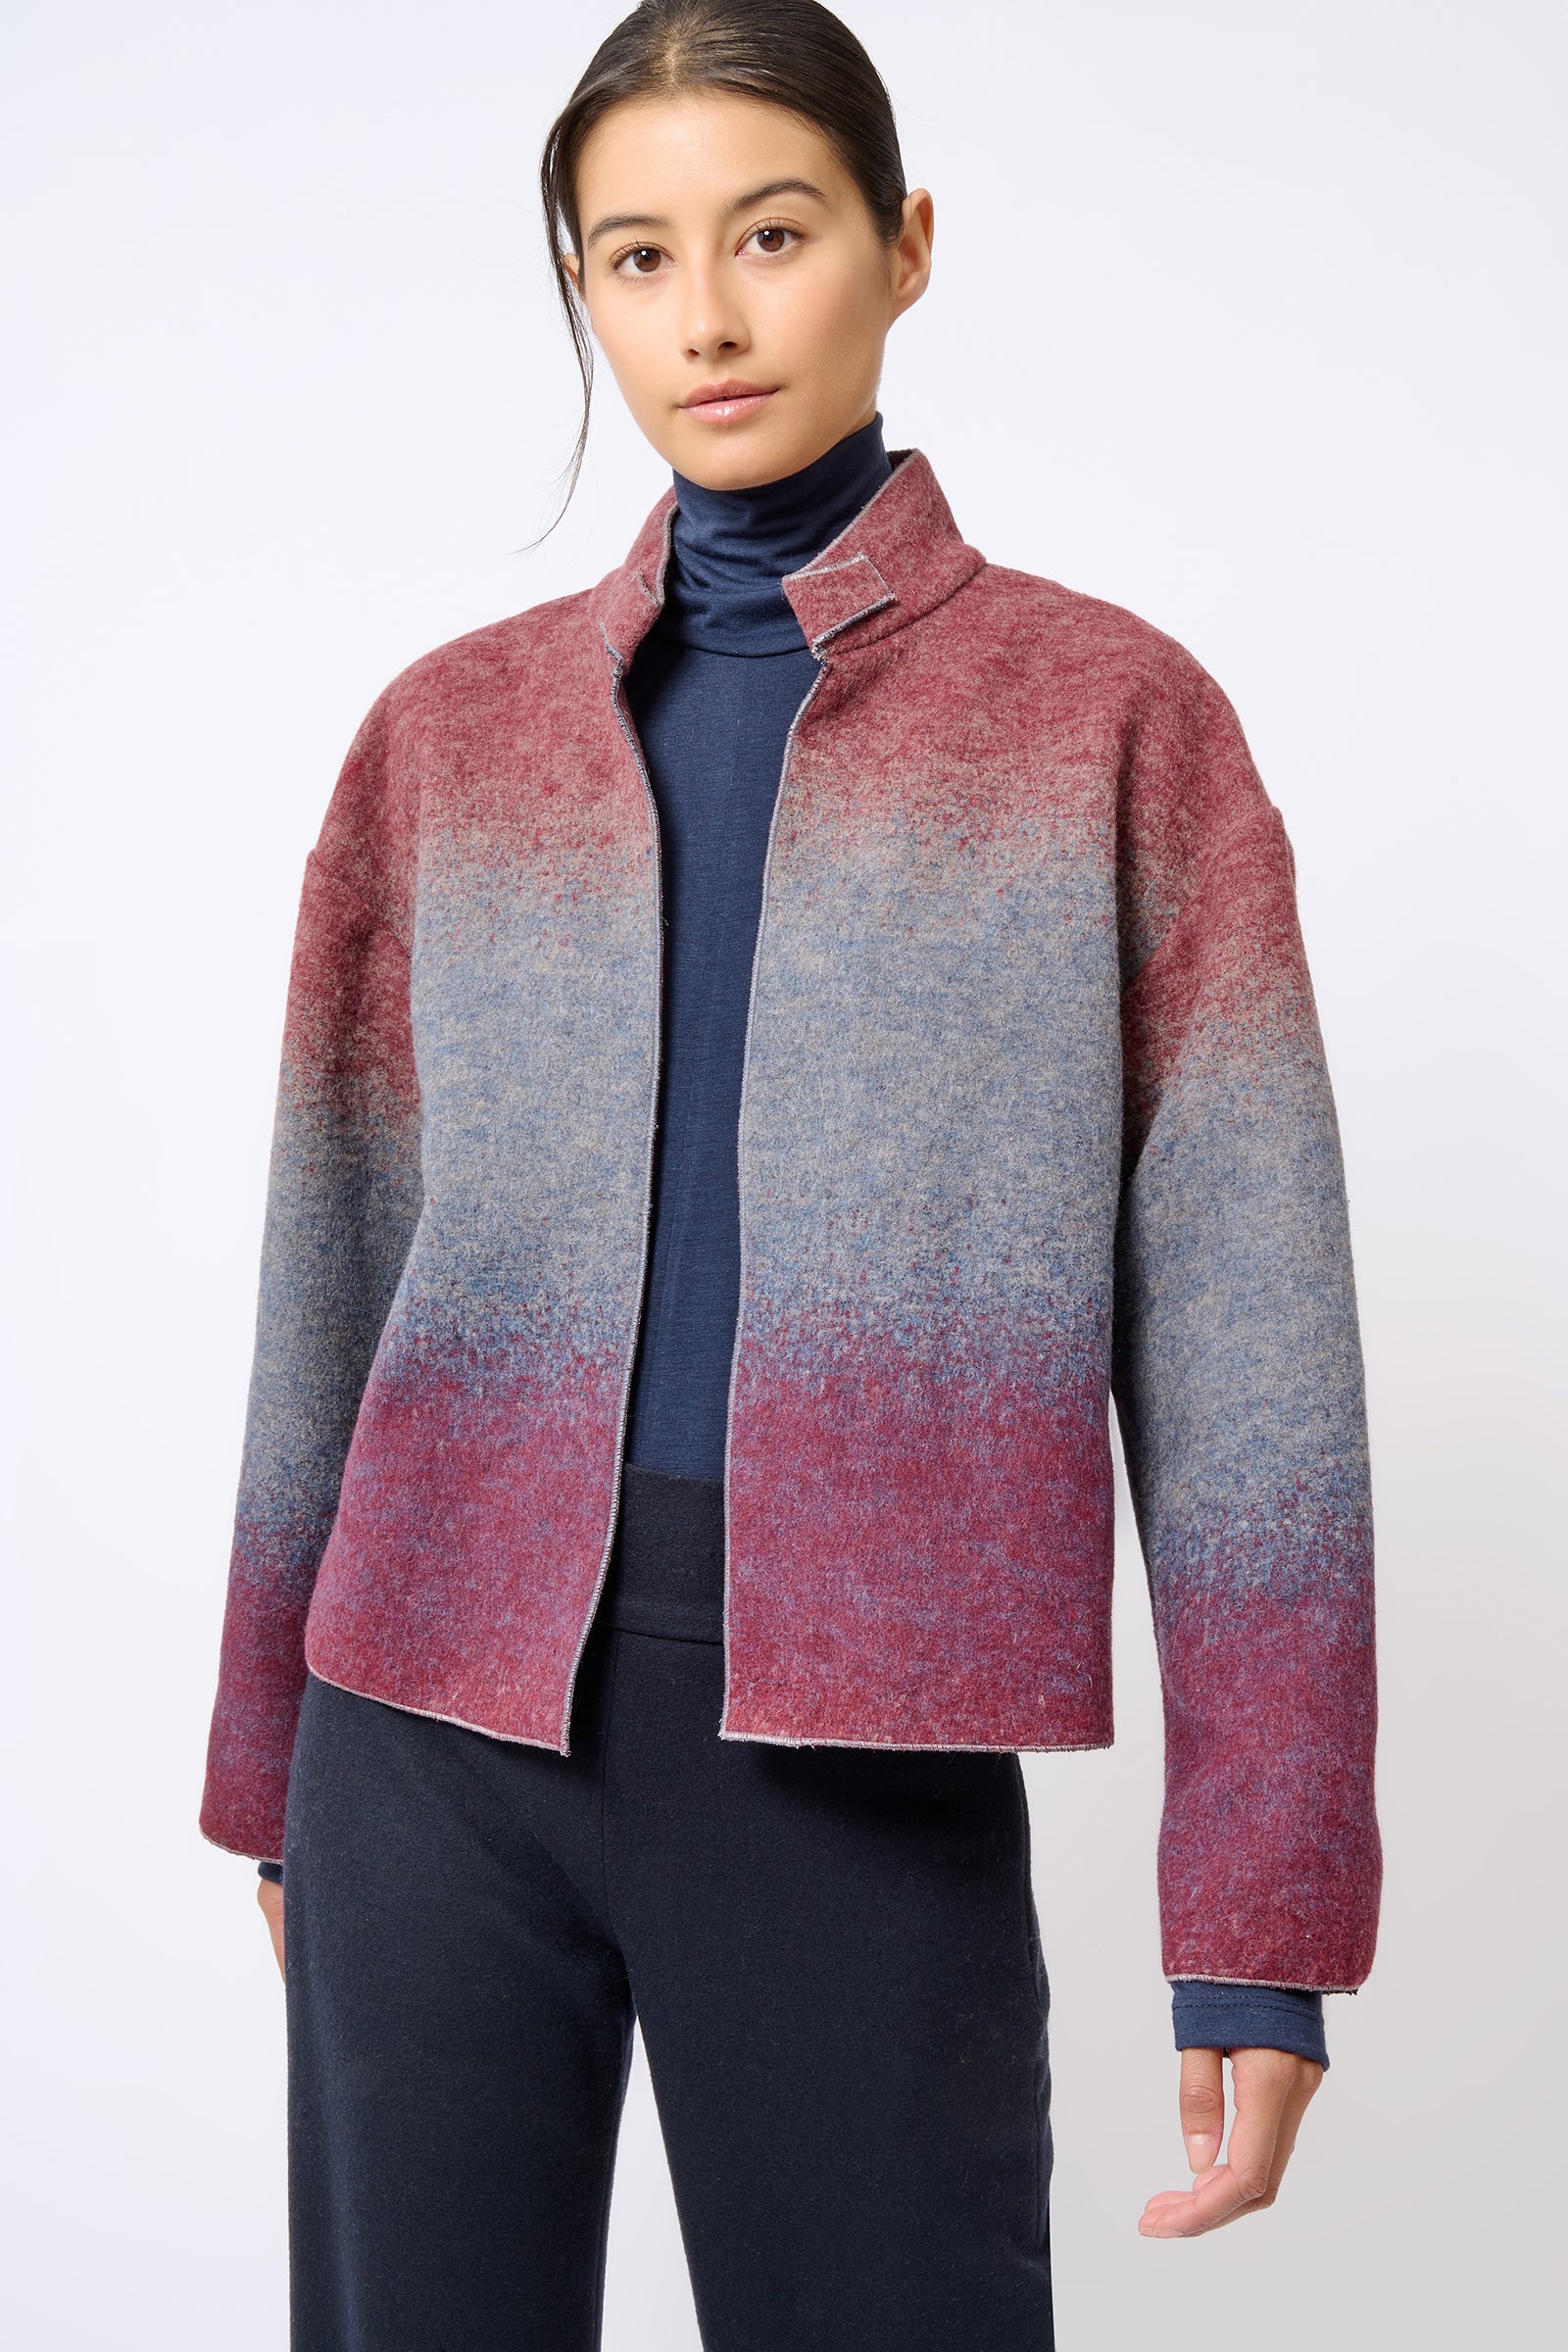 Kal Rieman Kasey Ombre Bomber in Ombre on Model Front View